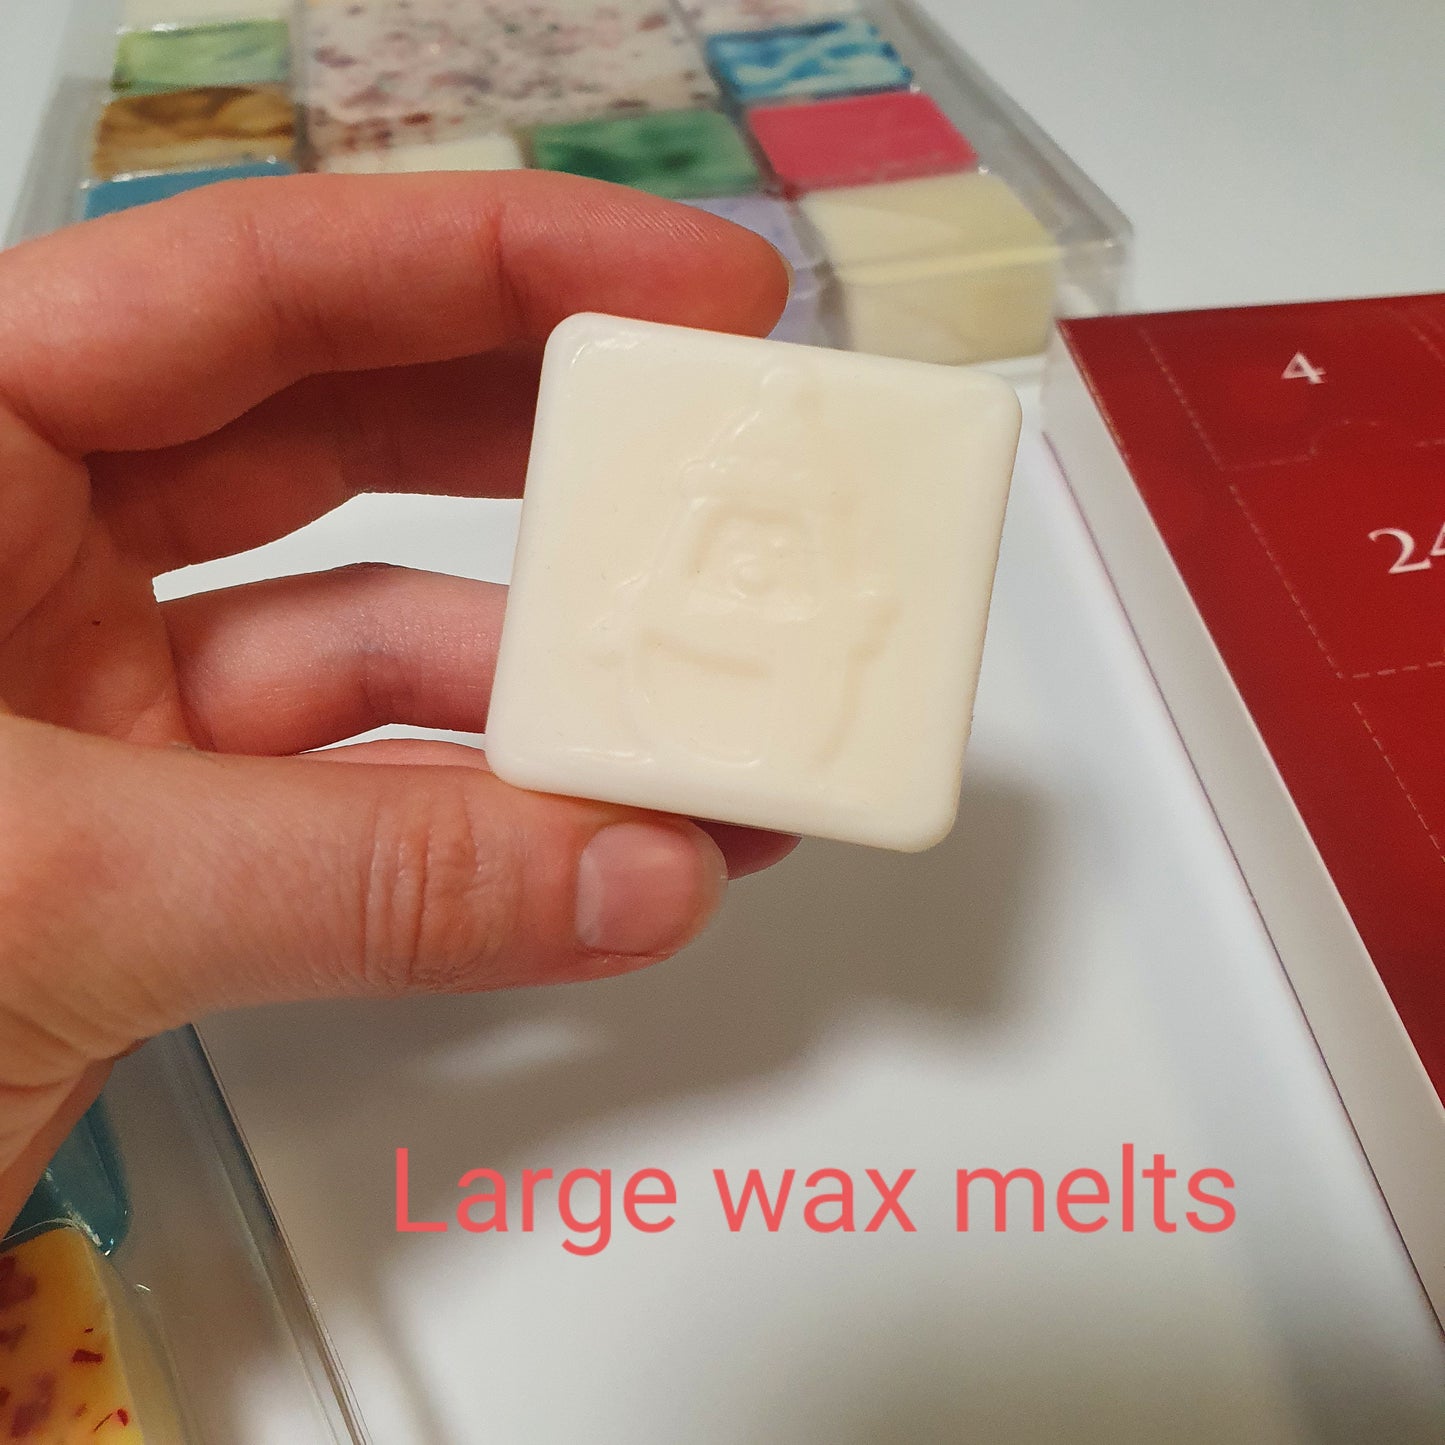 Soy Wax Melt Christmas Advent Calender for Adults